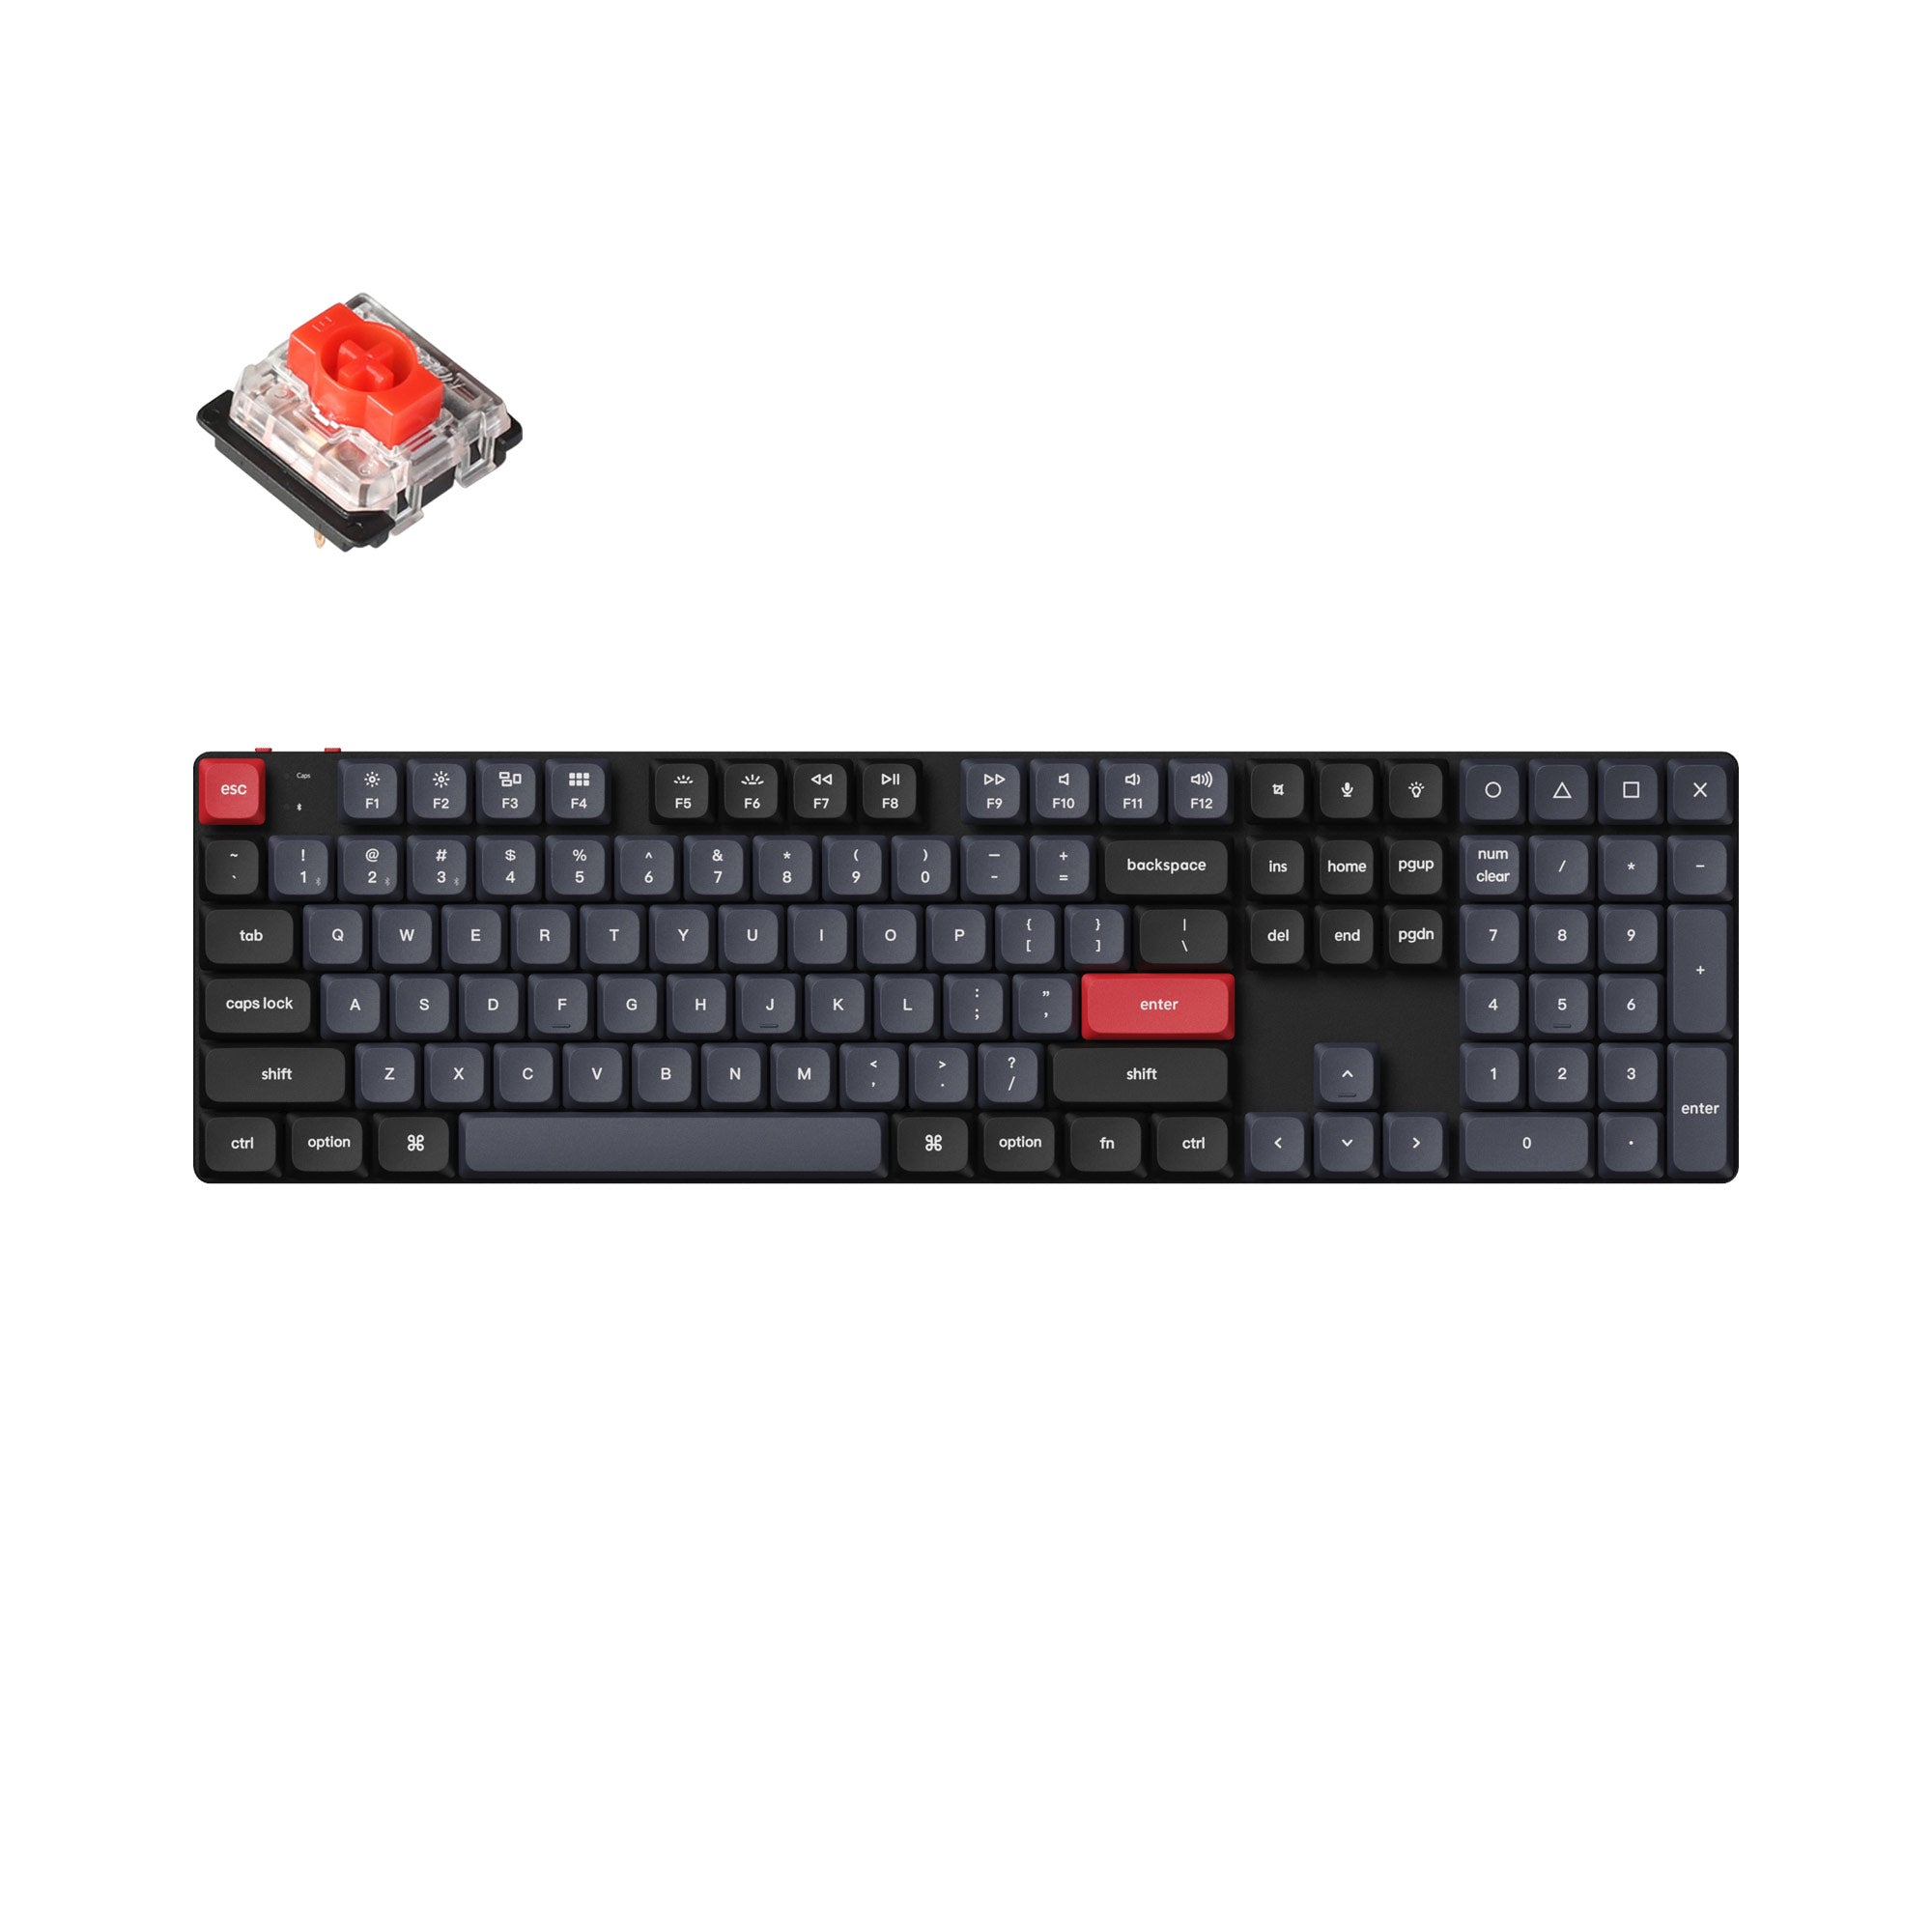 Black / RGB Backlight / Red (Hot-swappable)